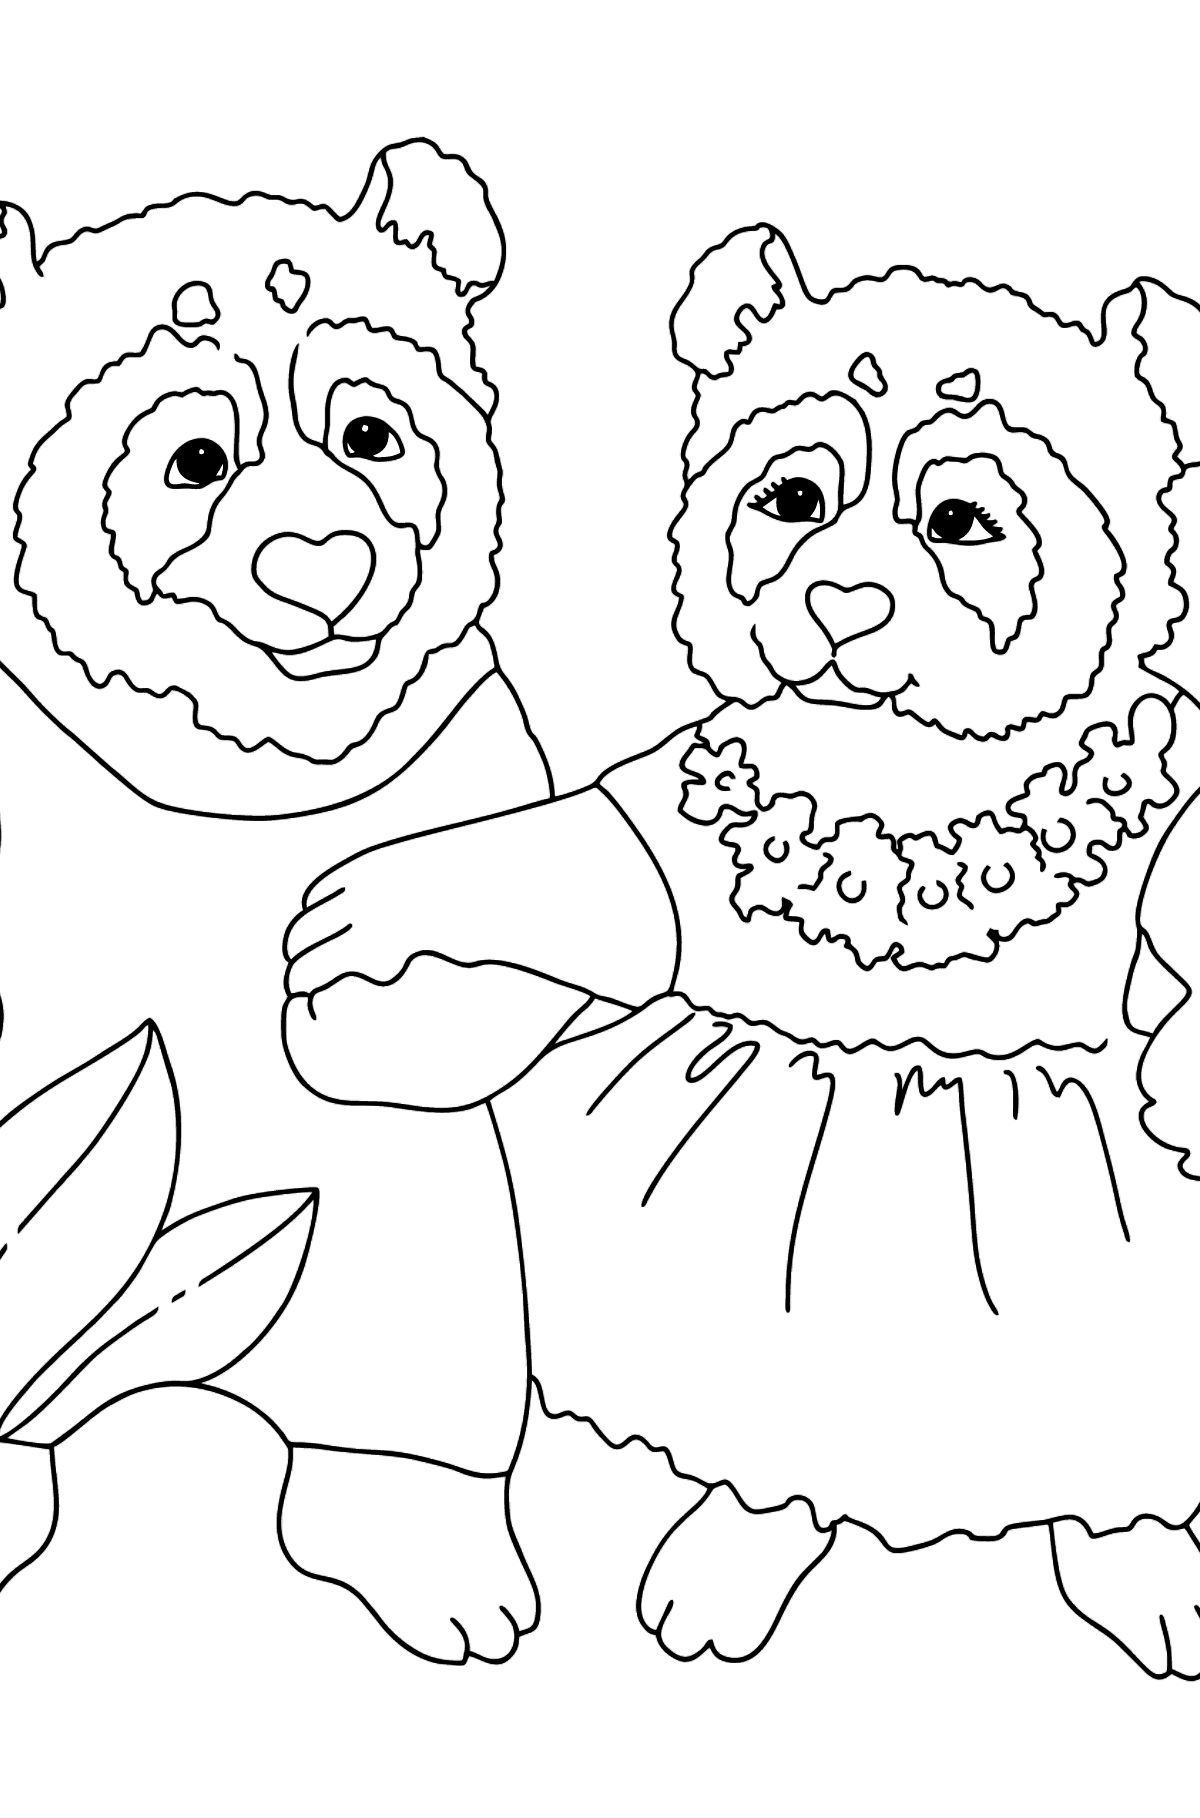 Coloring Page - Pandas are Taking a Walk - Coloring Pages for Kids